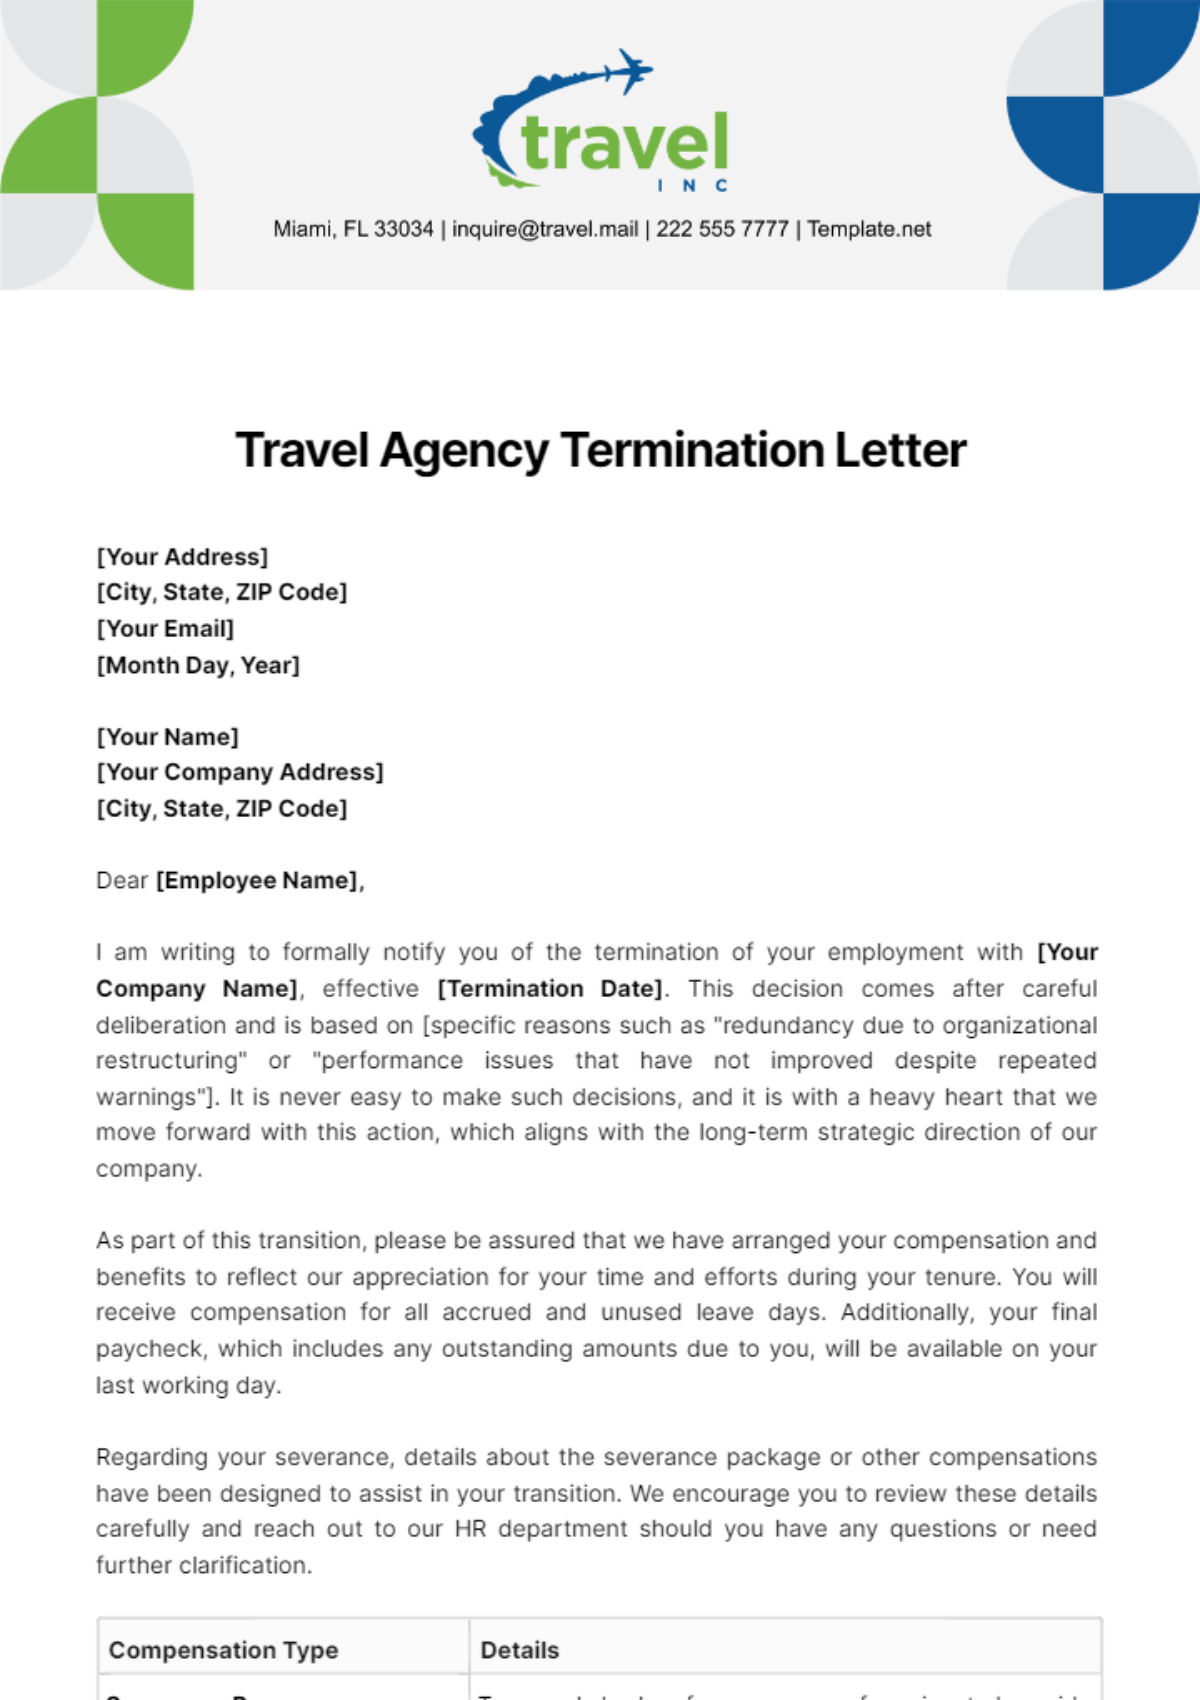 Travel Agency Termination Letter Template